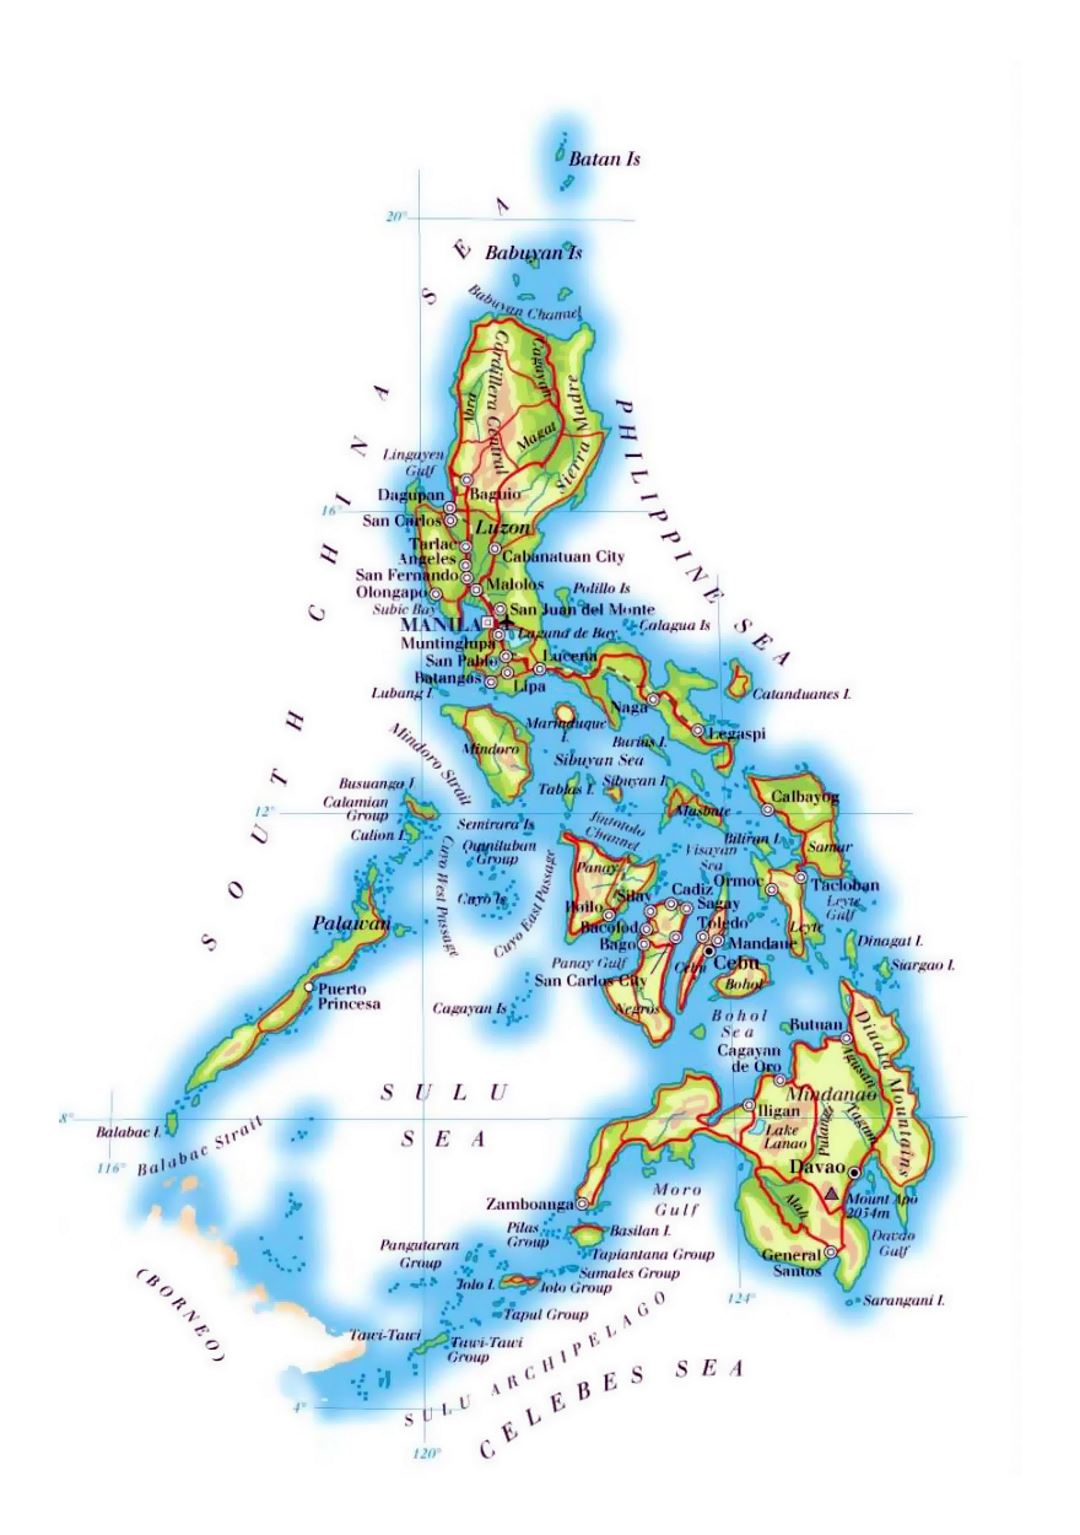 Detailed elevation map of Philippines with roads, railroads, major cities and airports